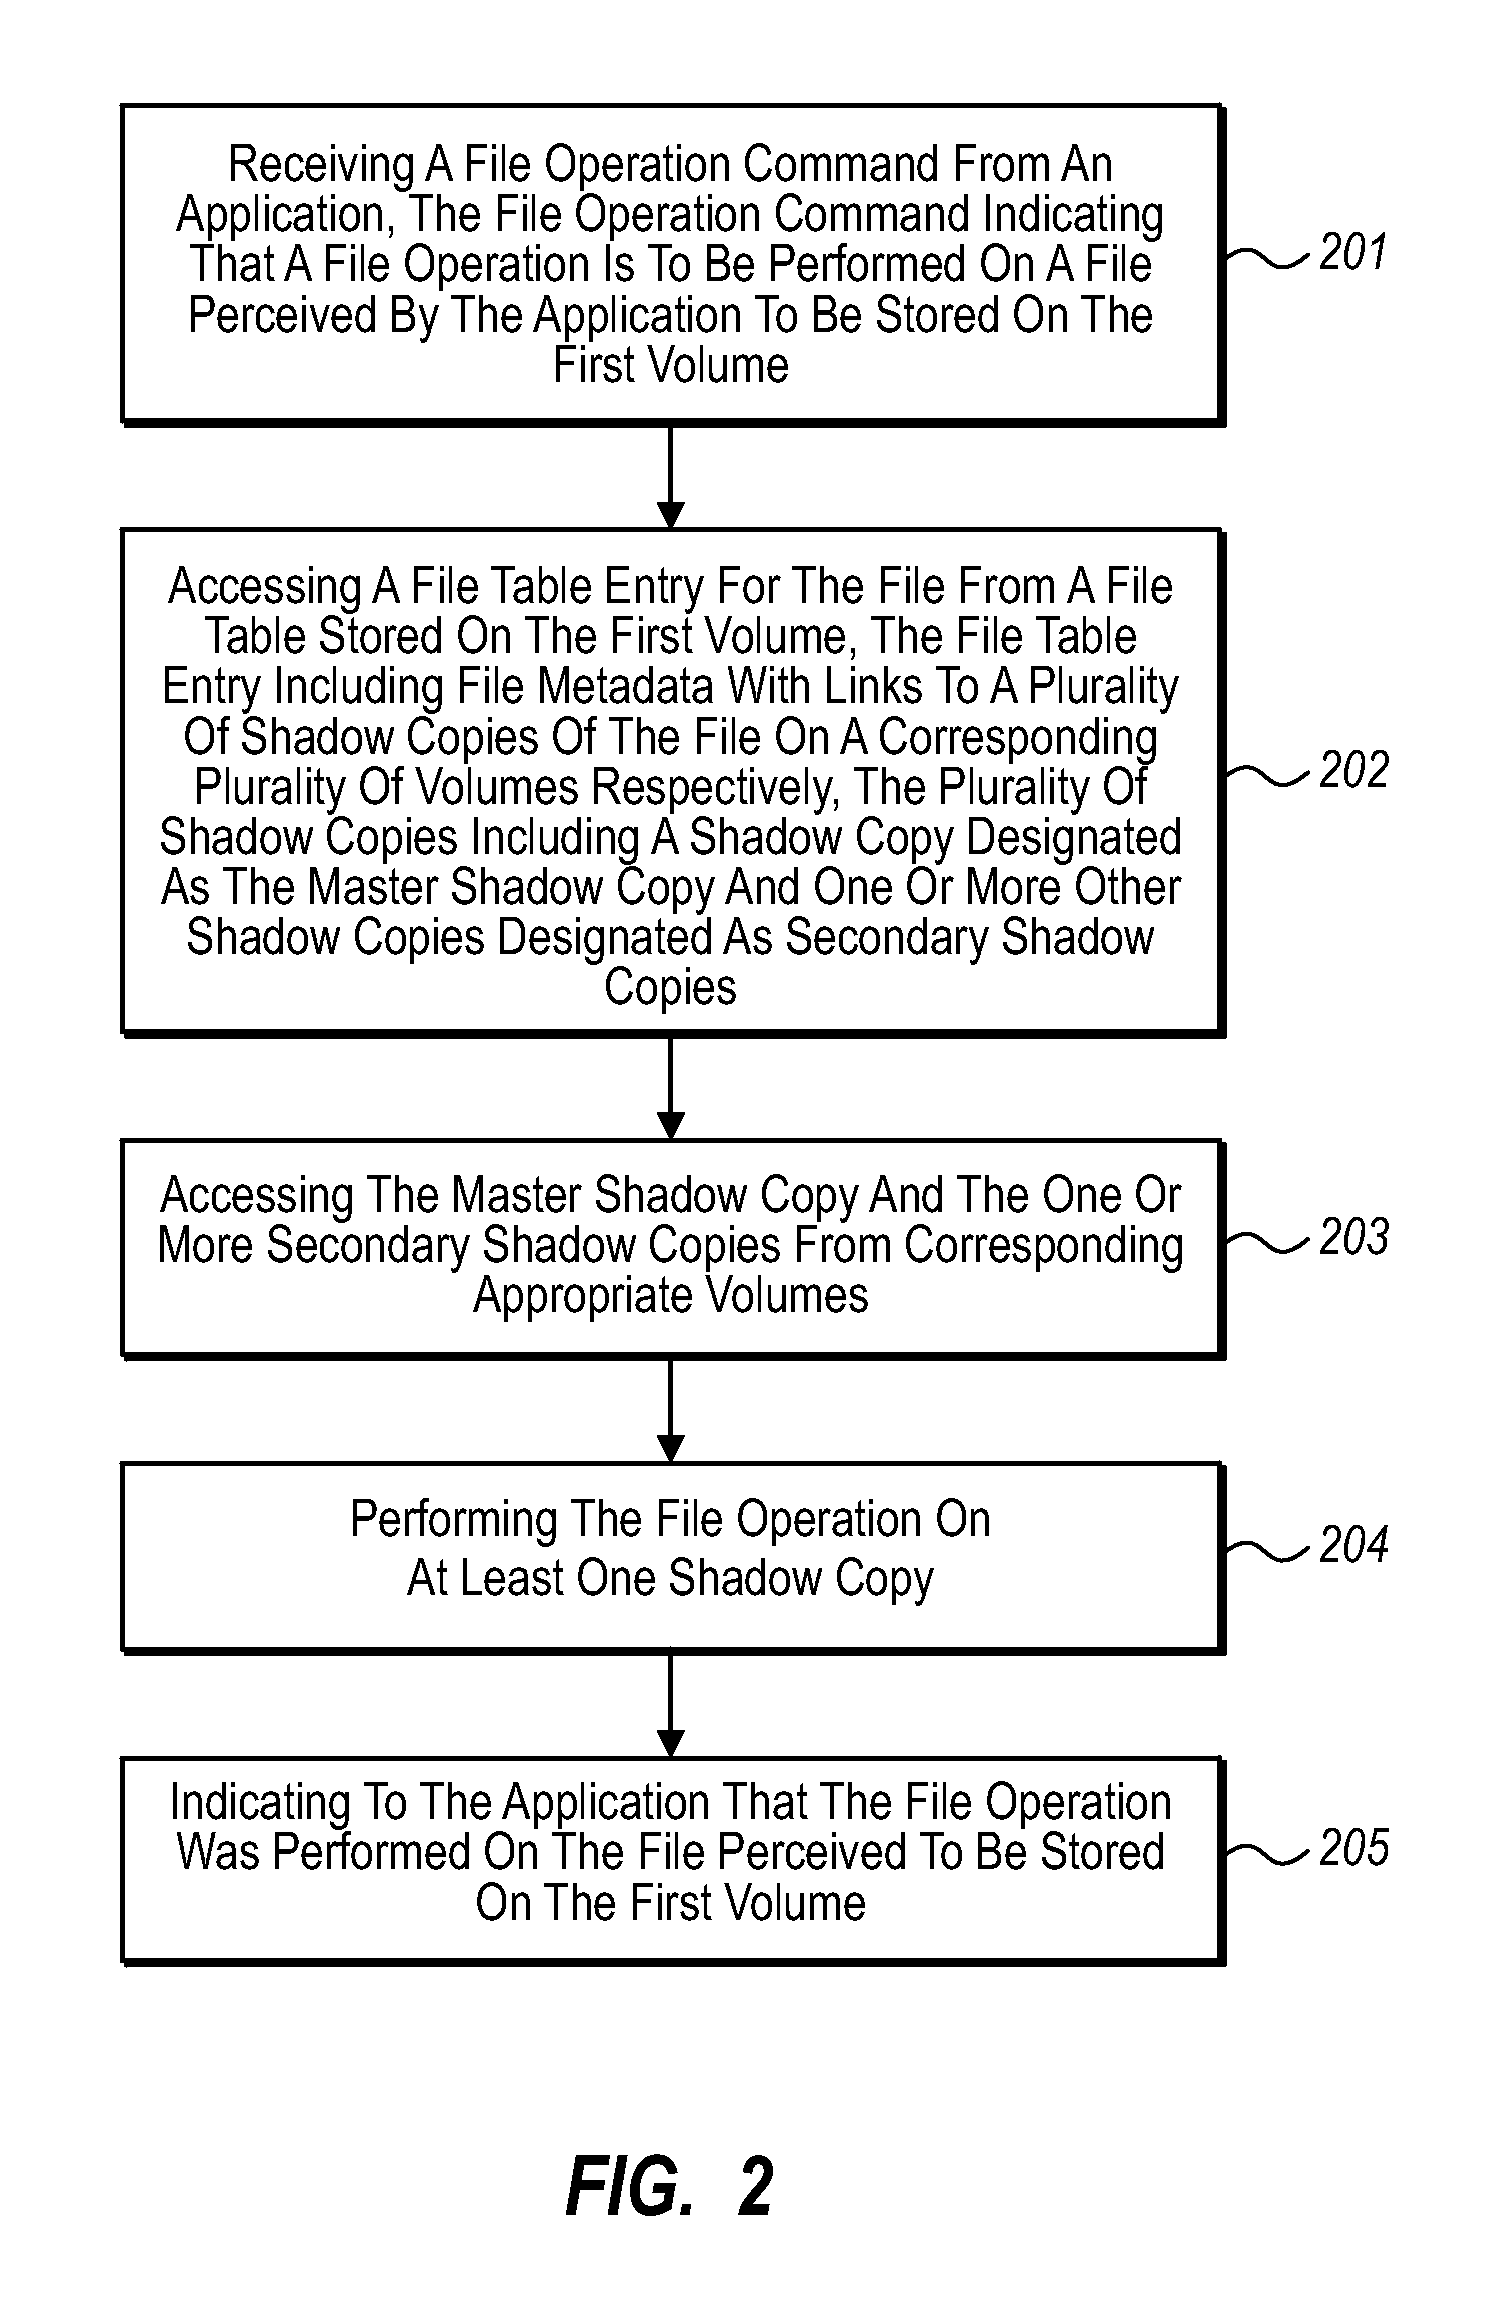 Extending non-volatile storage at a computer system